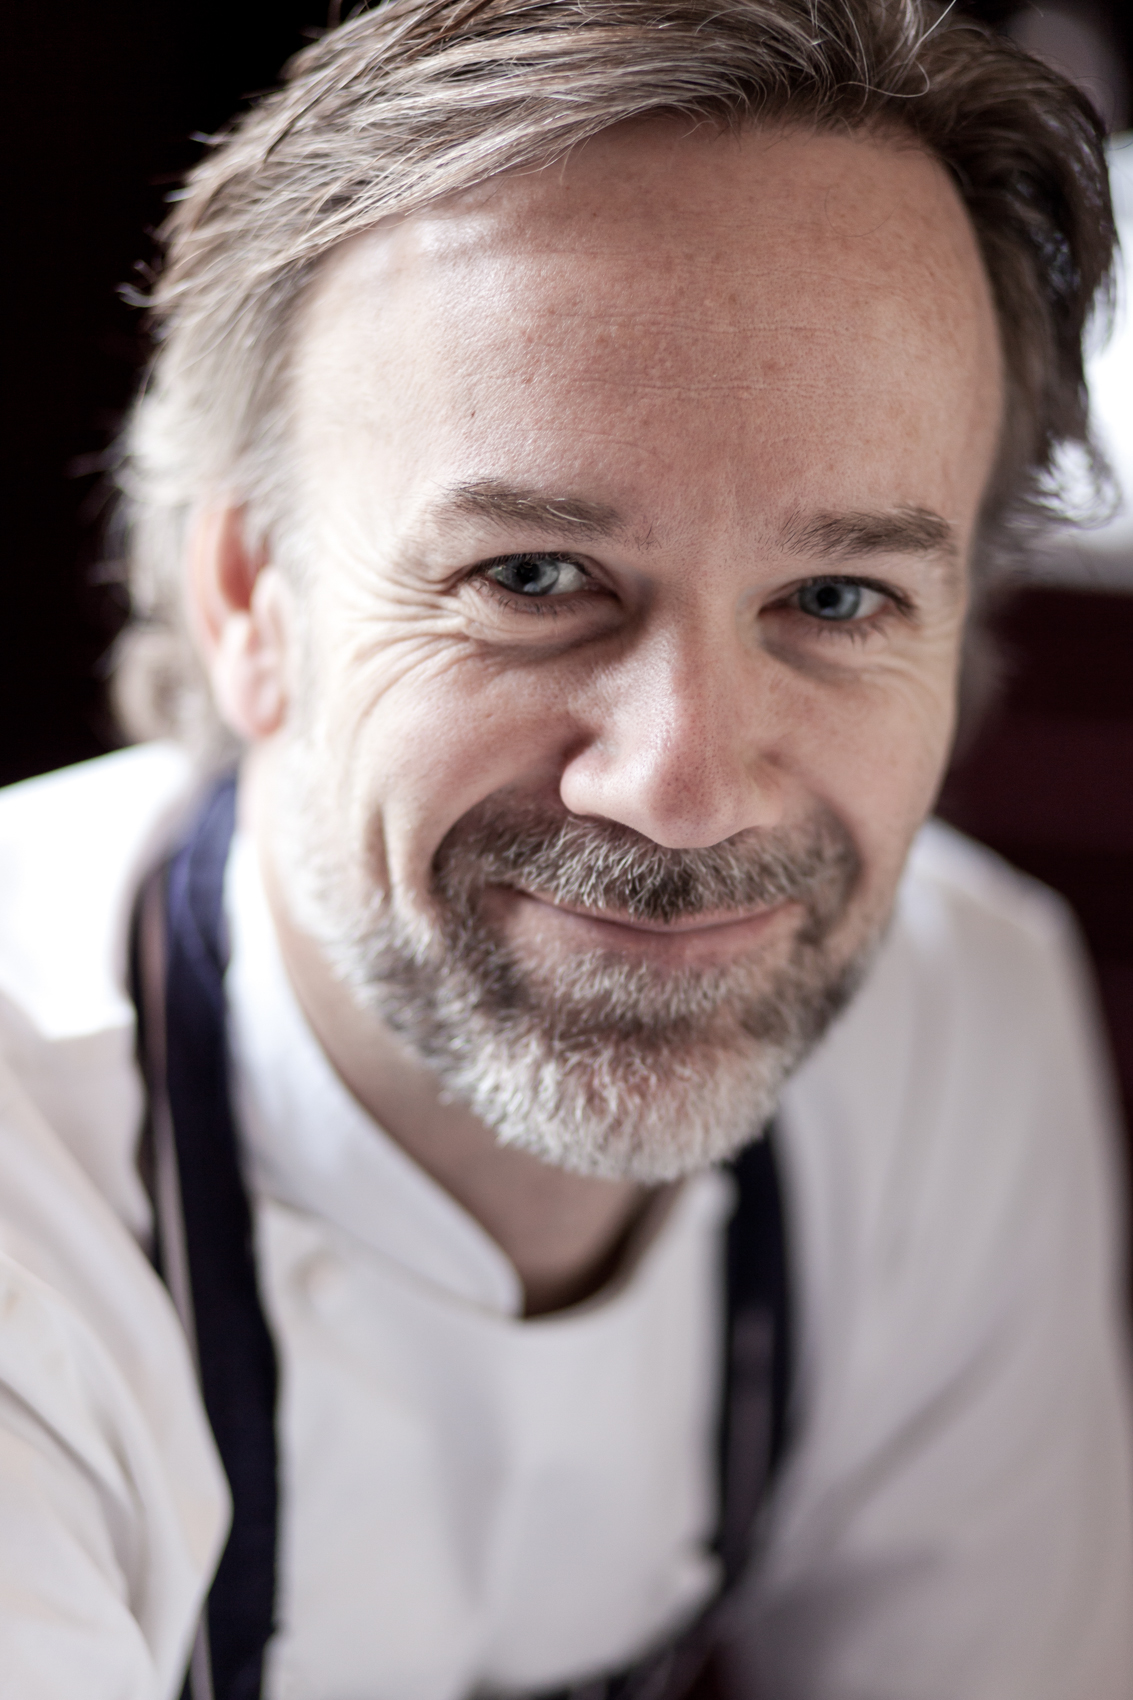 The death of fine dining? |Marcus Wareing opens Marcus